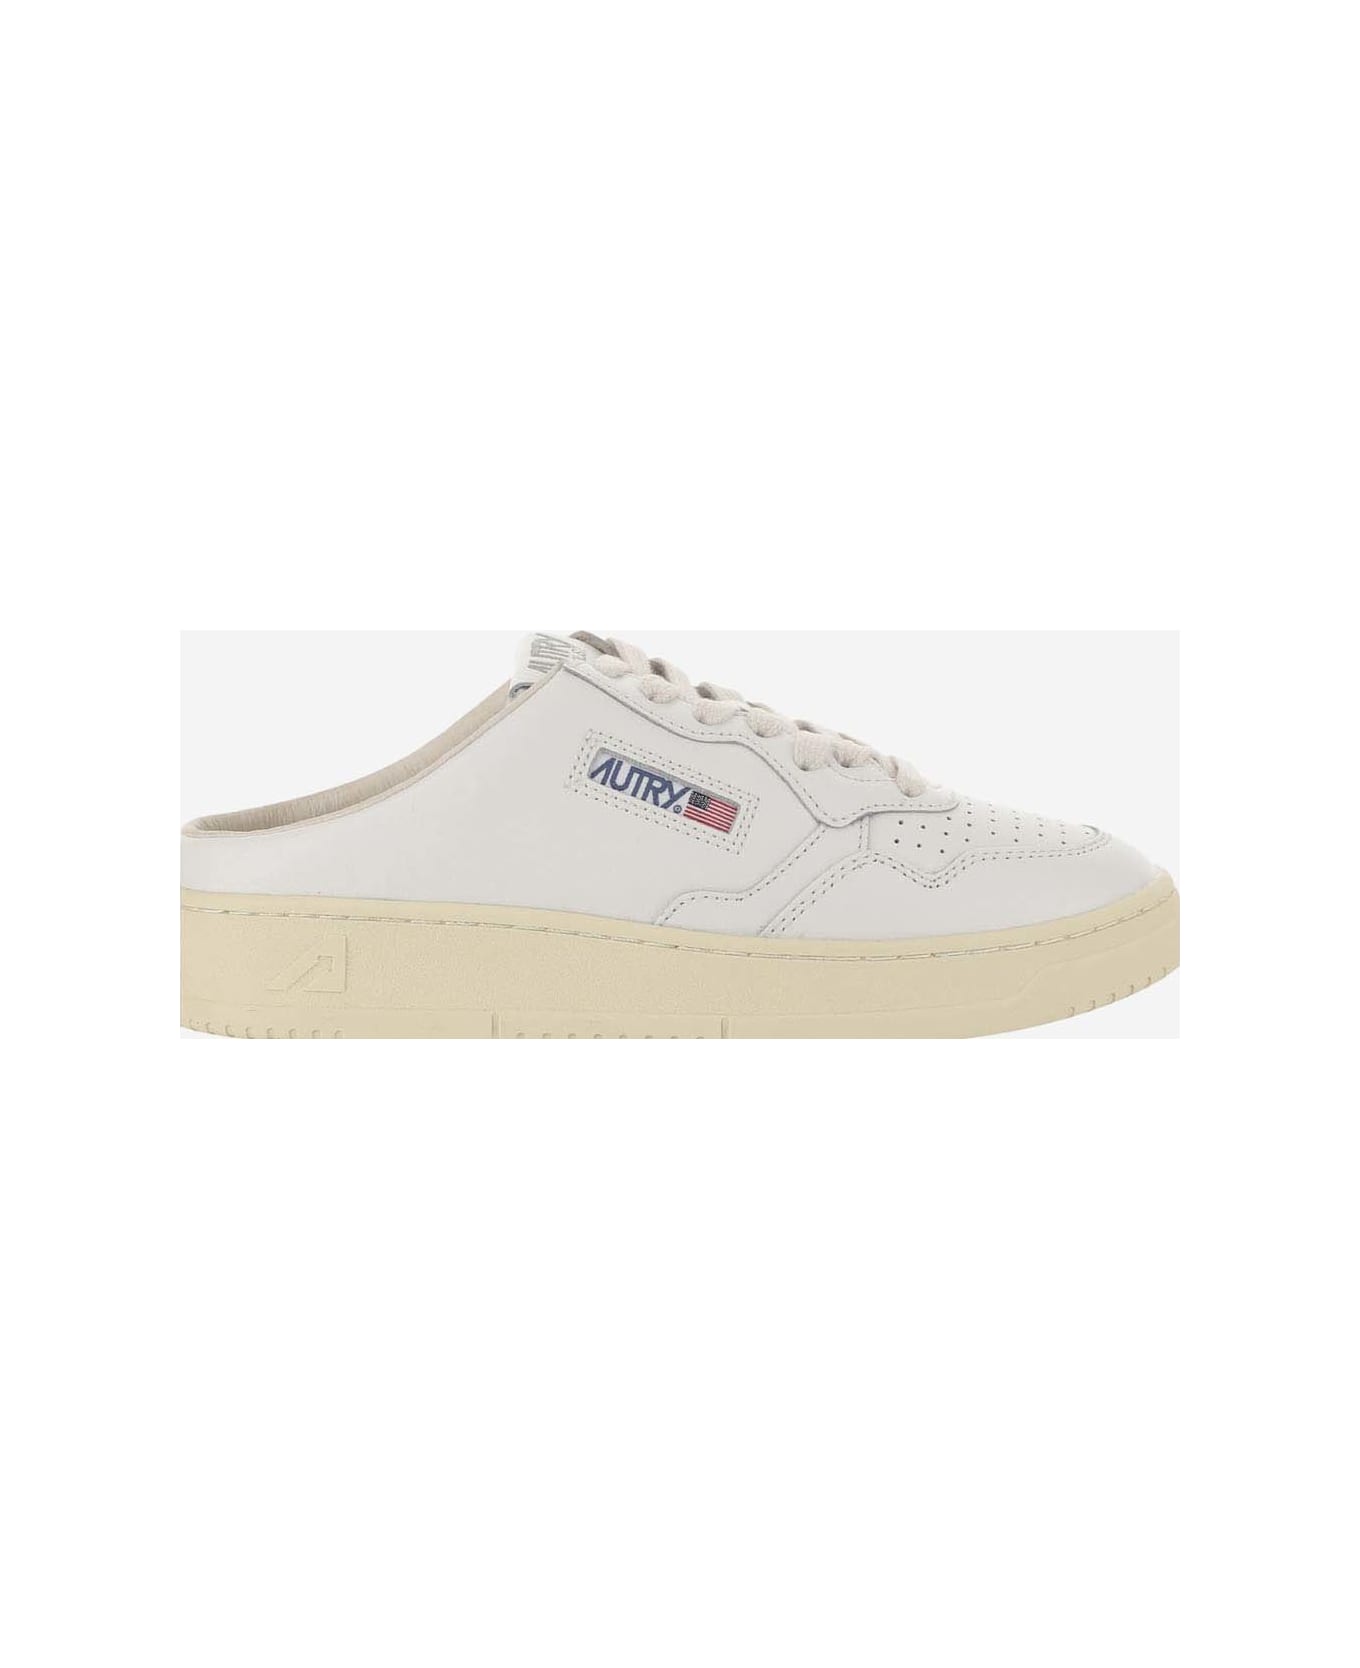 Autry Medalist Mule Low Leather Sneakers - White